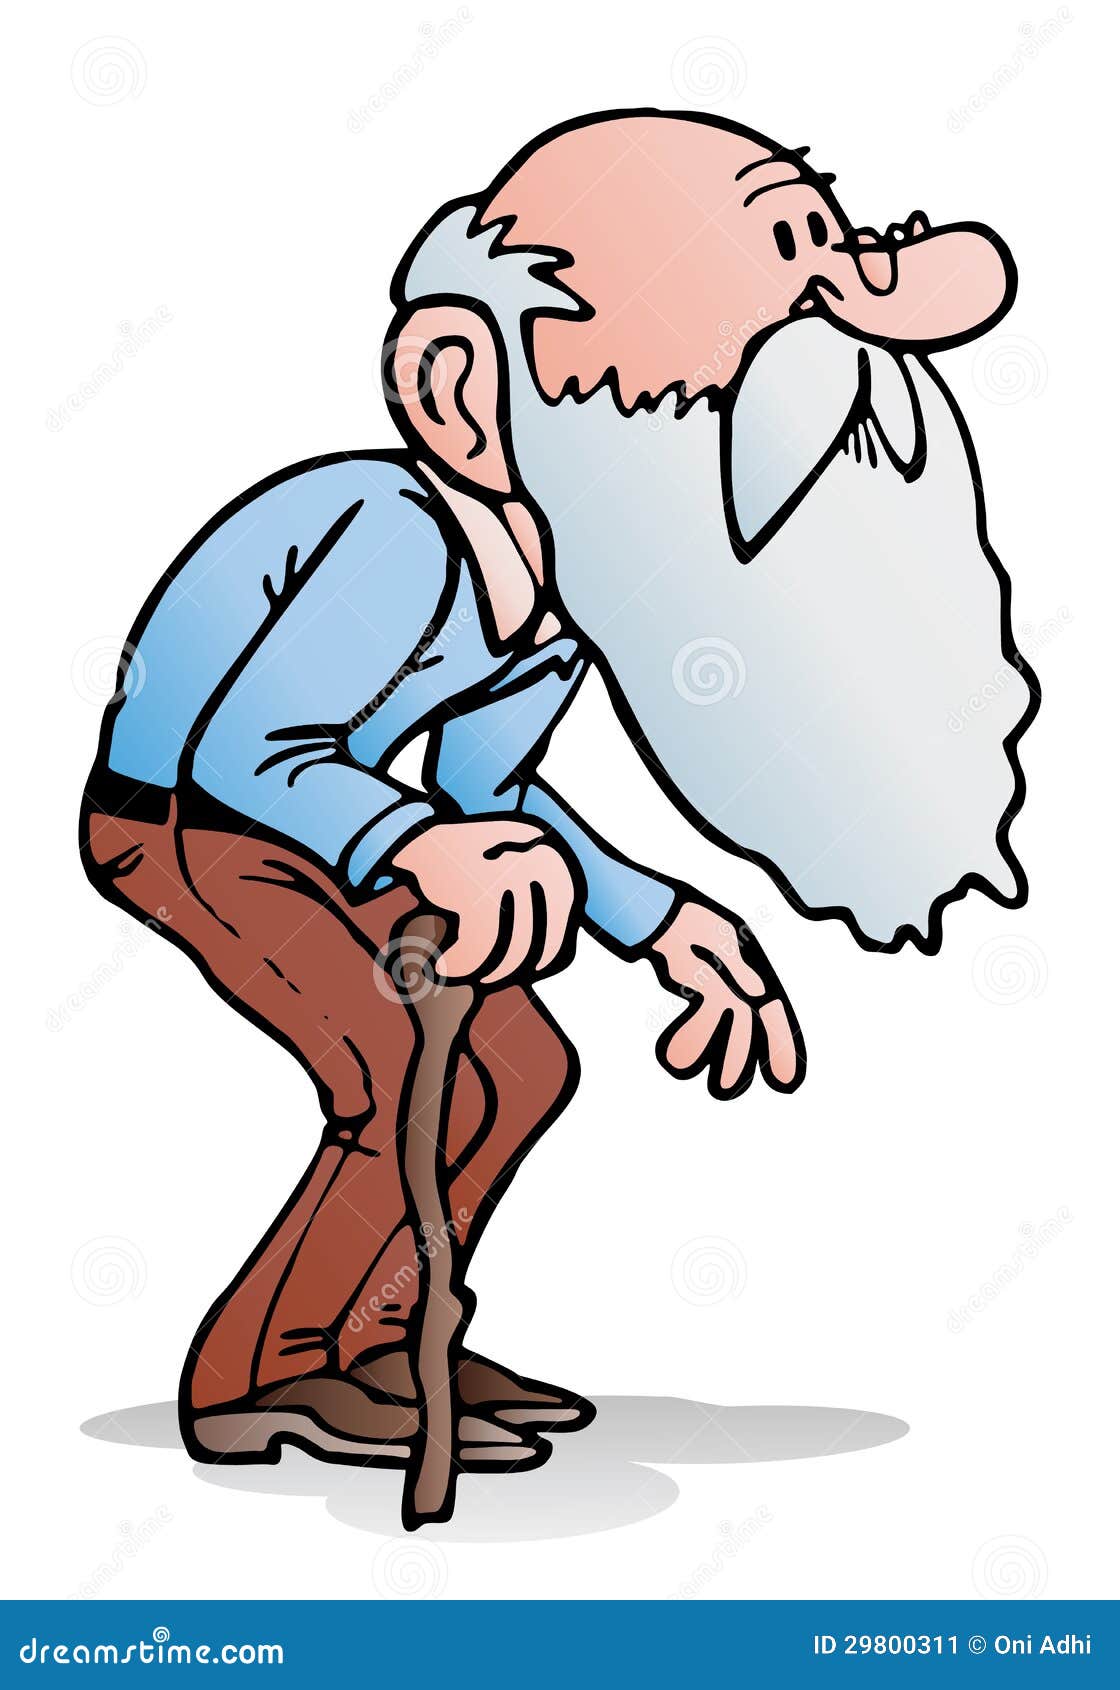 clipart old man dancing - photo #39